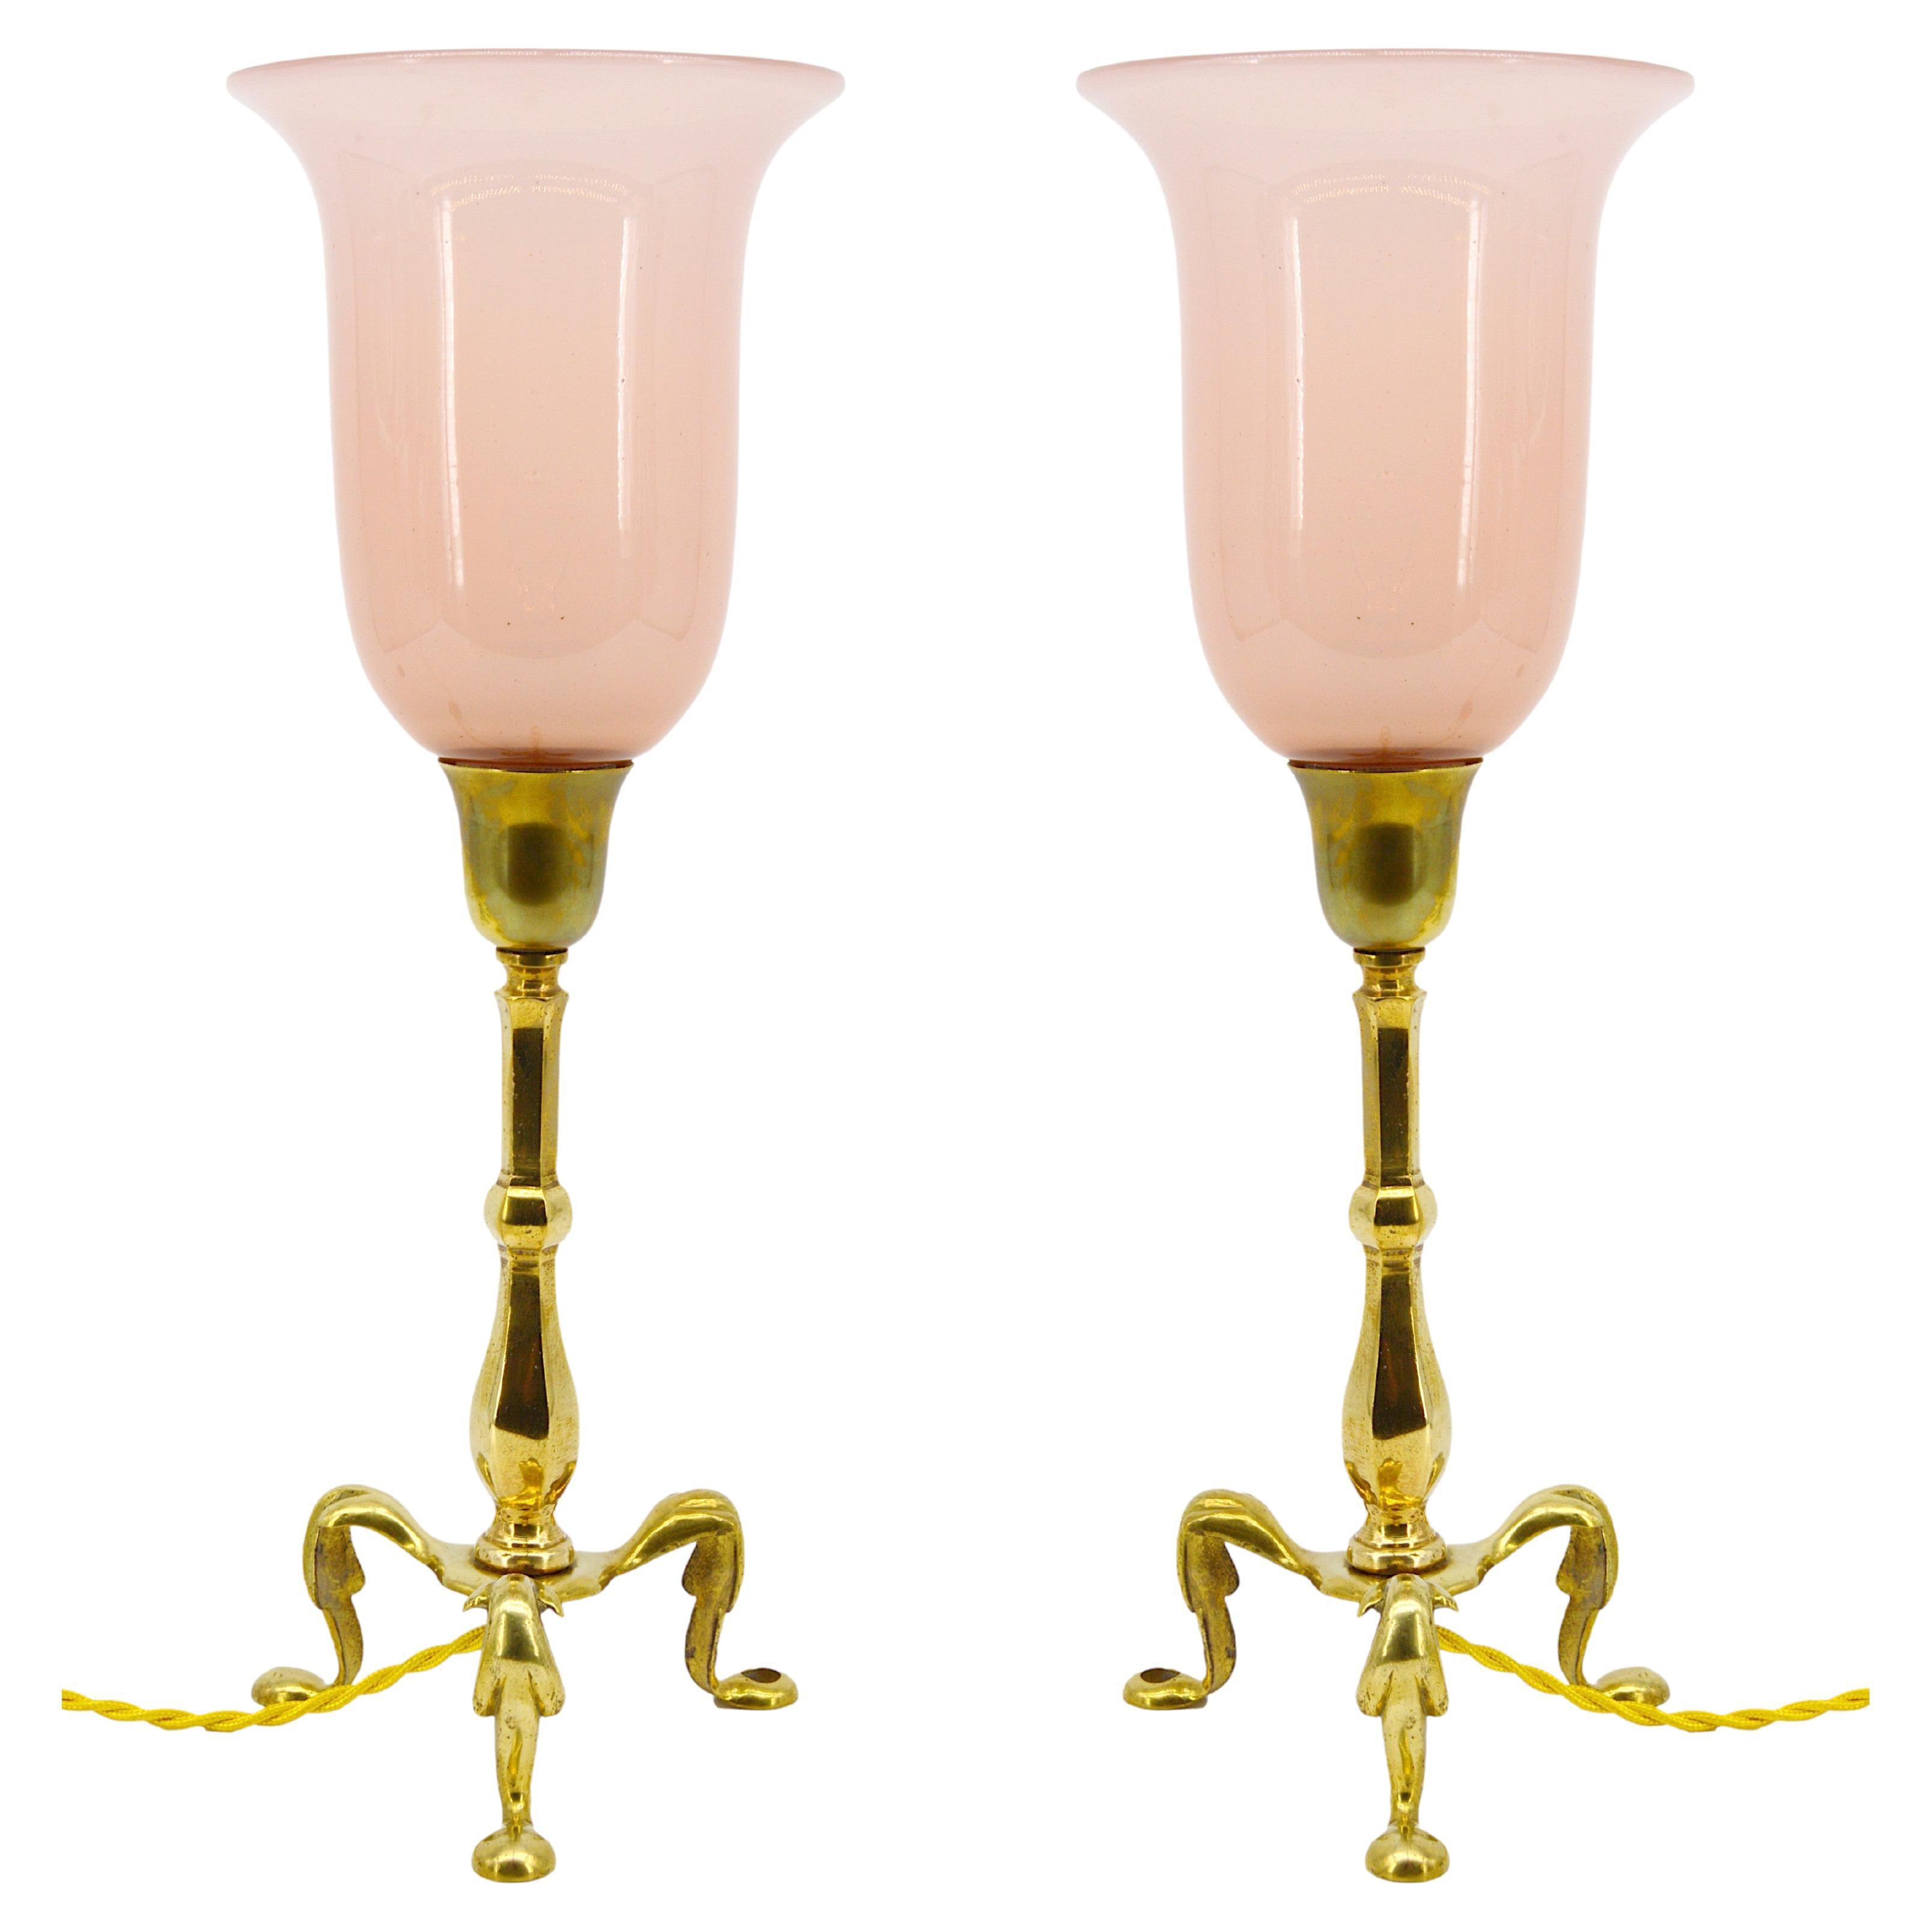 W.A.S Benson (att) Pair of Table Lamp or Wall Sconces, 1900